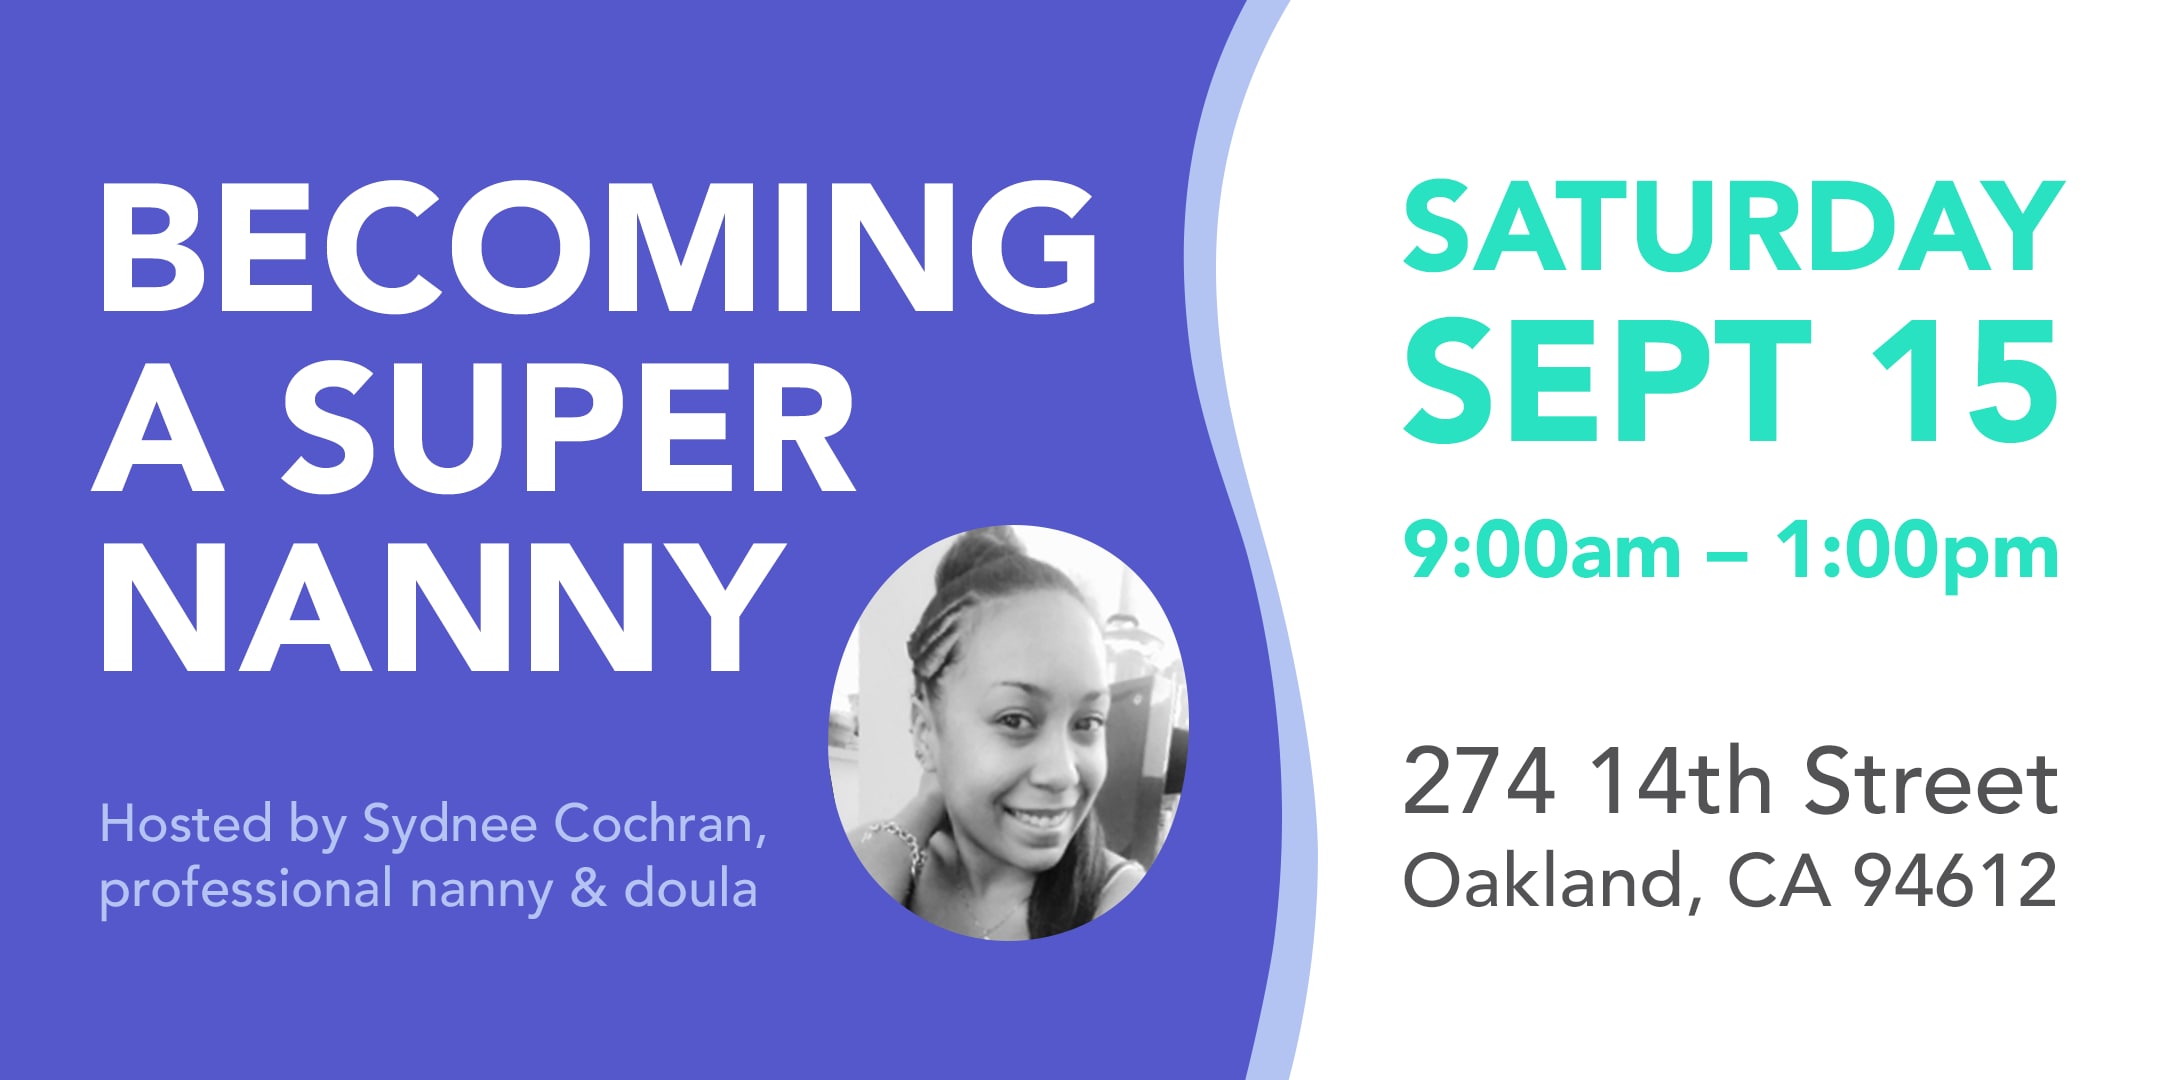 Exclusive SF Bay Area Workshop: Becoming a Super Nanny